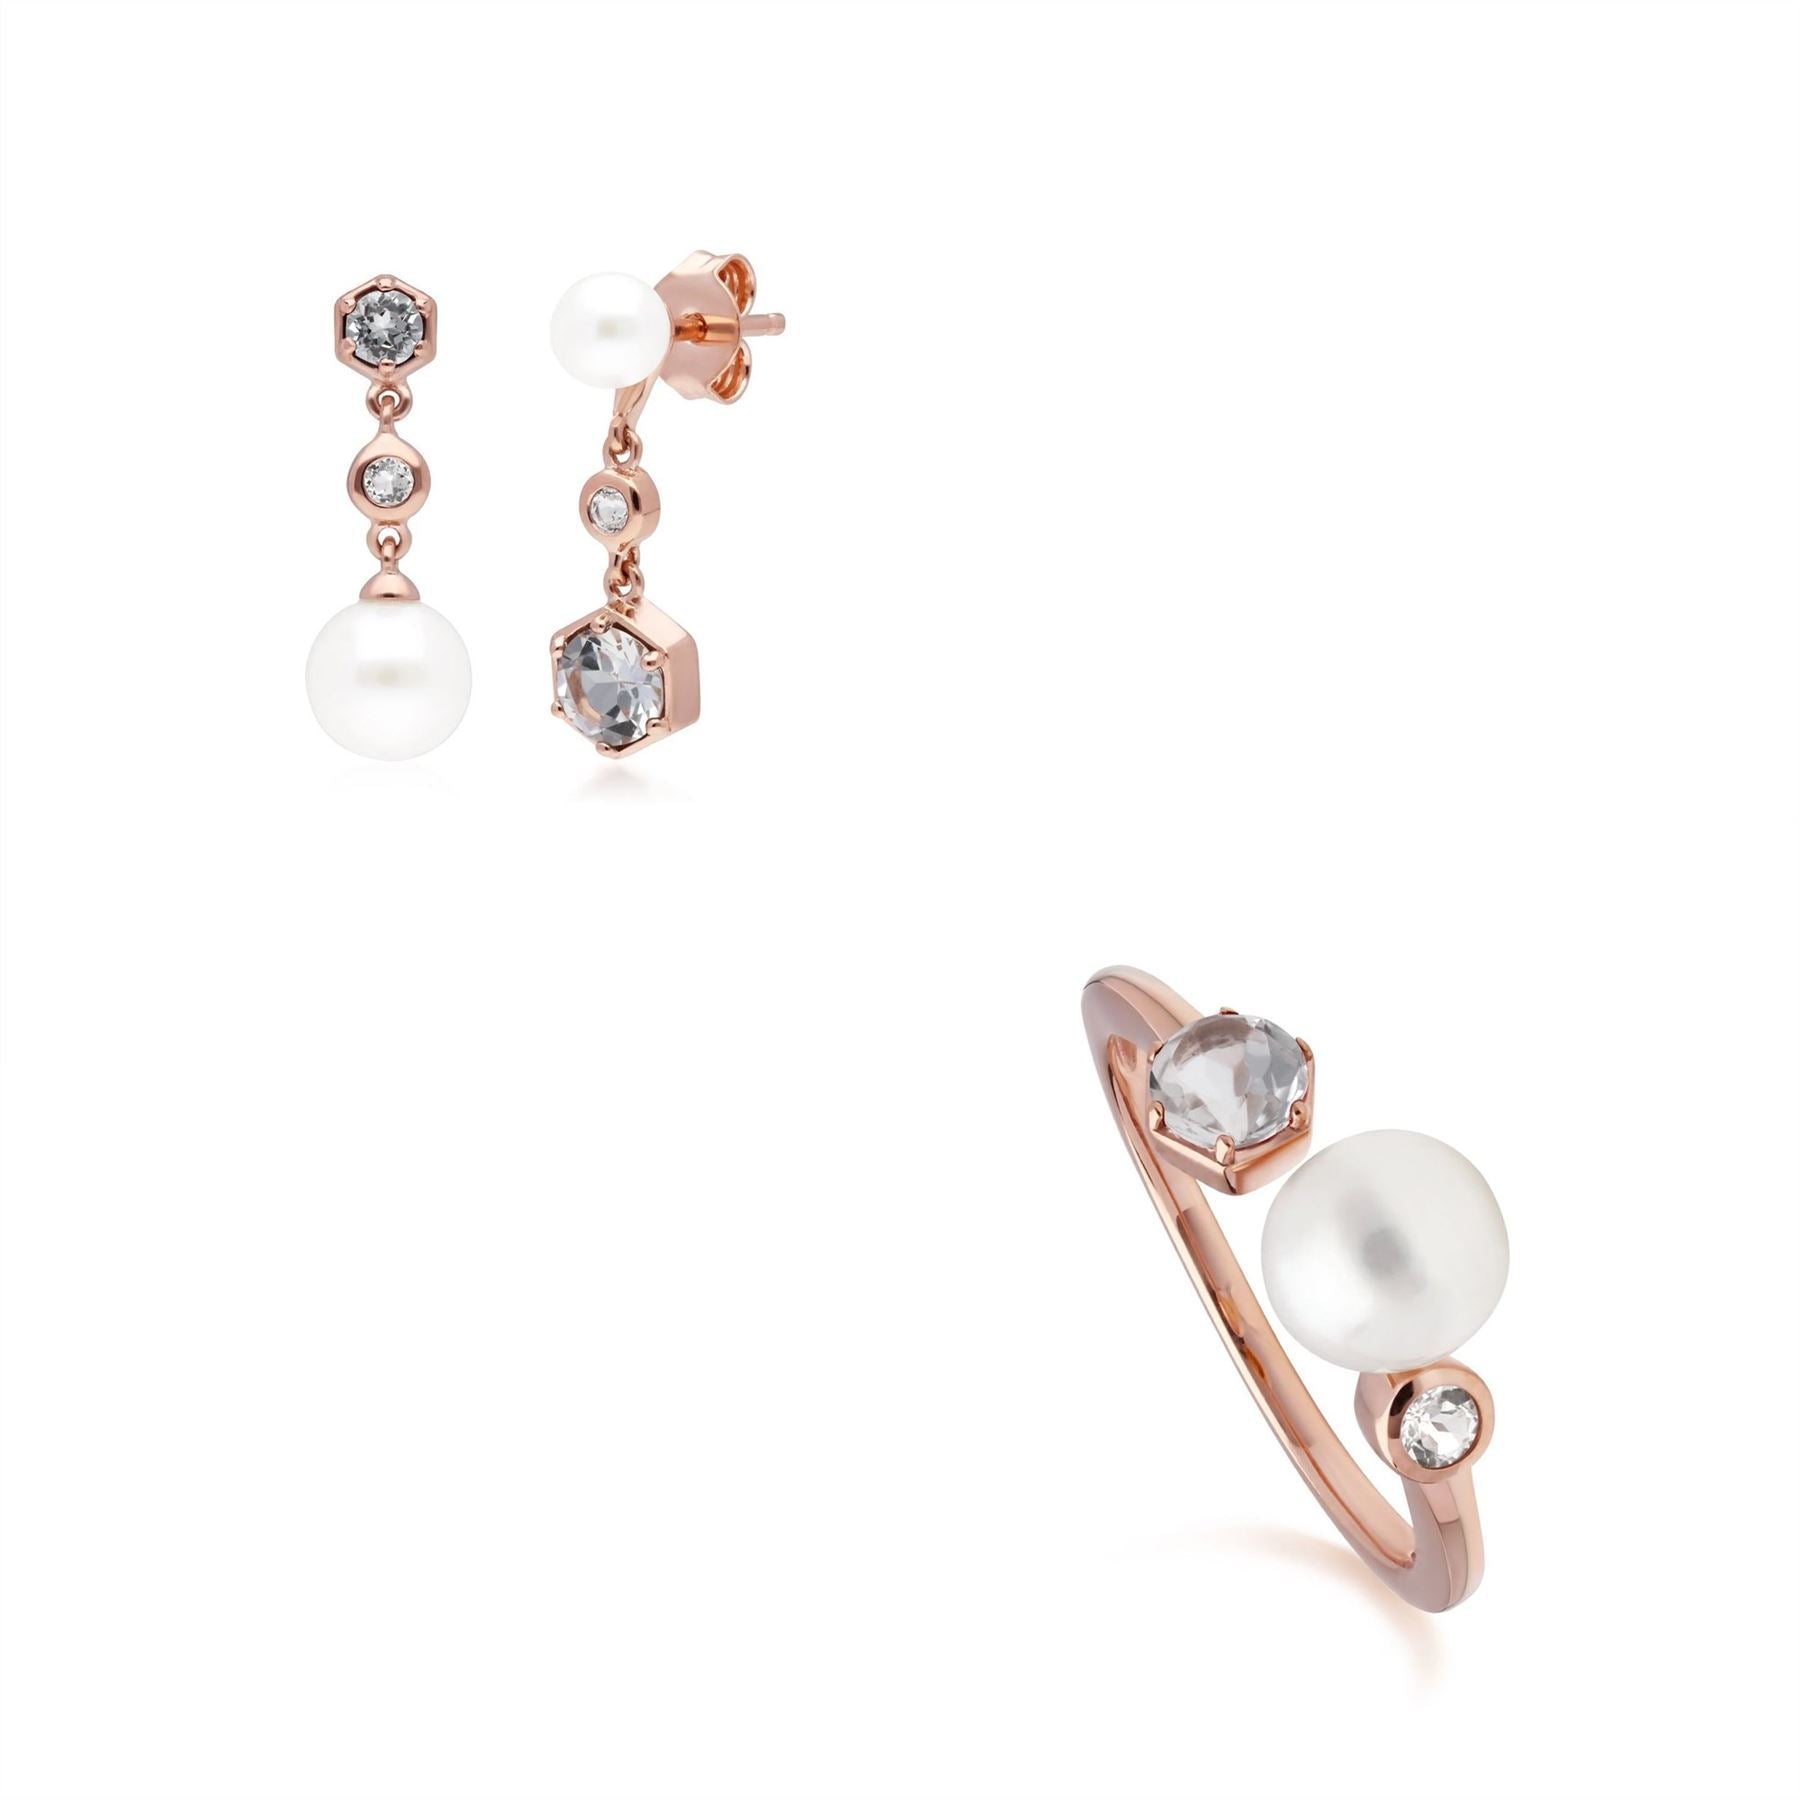 Modern Pearl & White Topaz Earring & Ring Set in Rose Gold Plated Sterling Silver